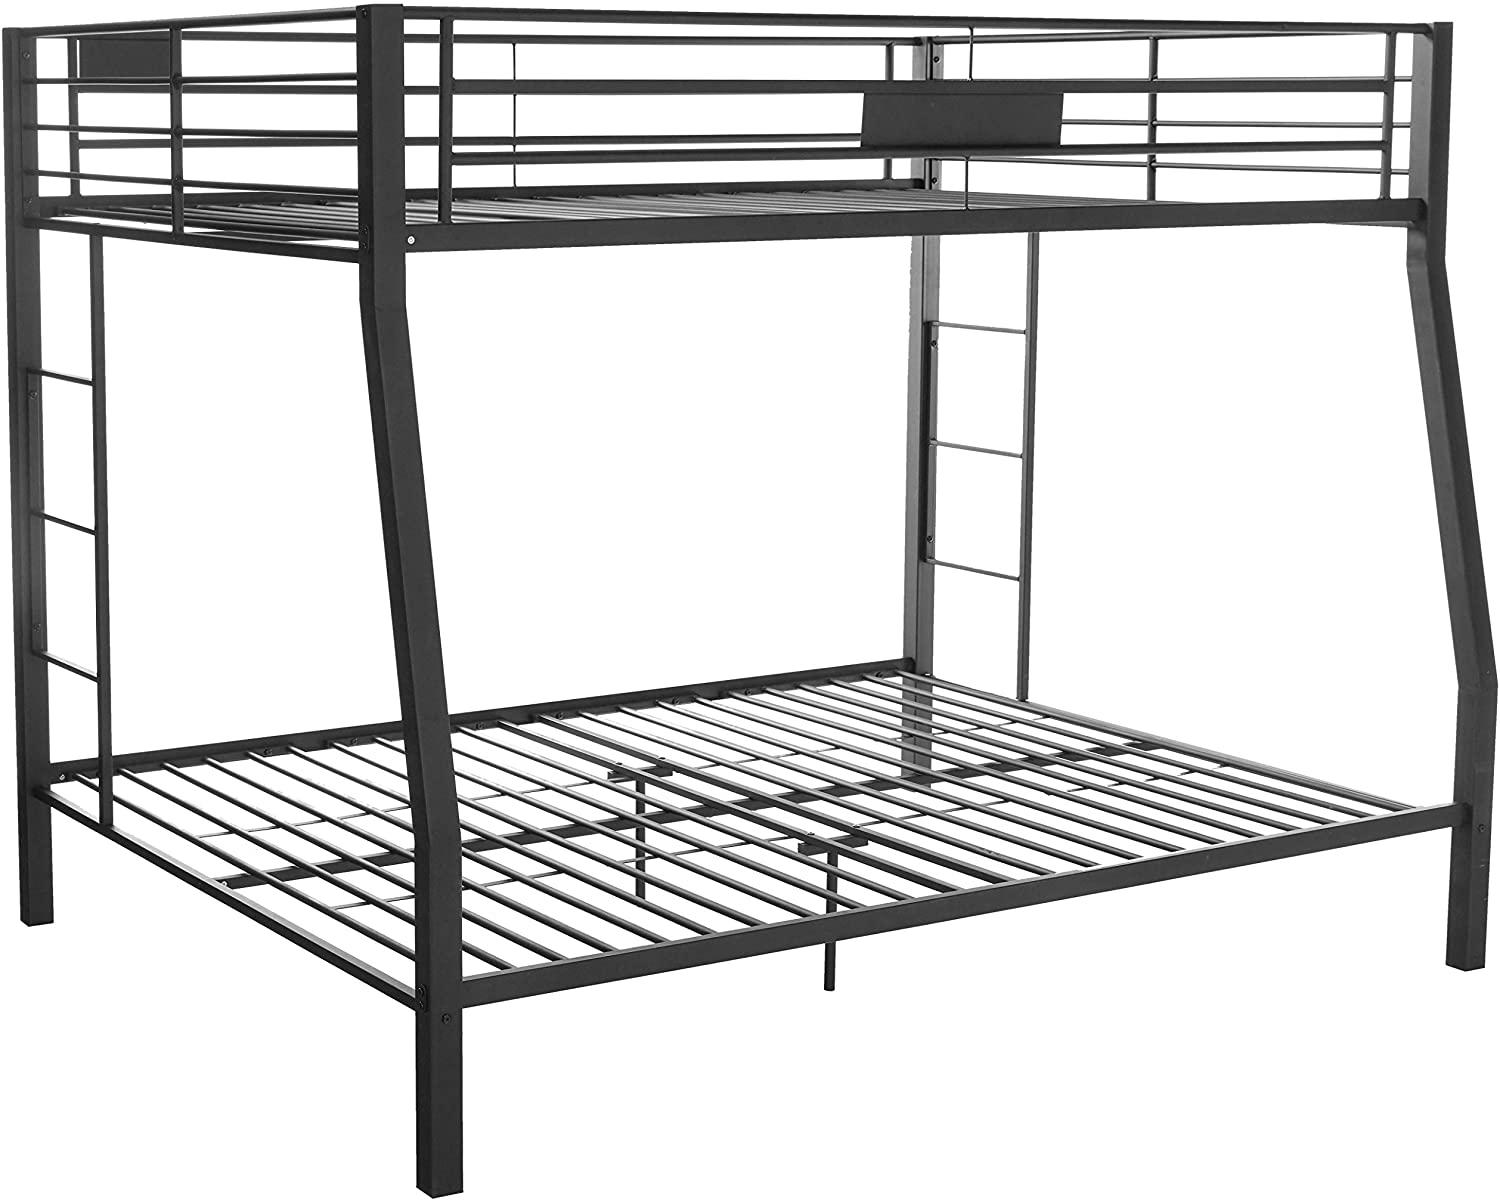 

    
Contemporary Sandy Black Full XL/Queen Bunk Bed by Acme Limbra 38005
